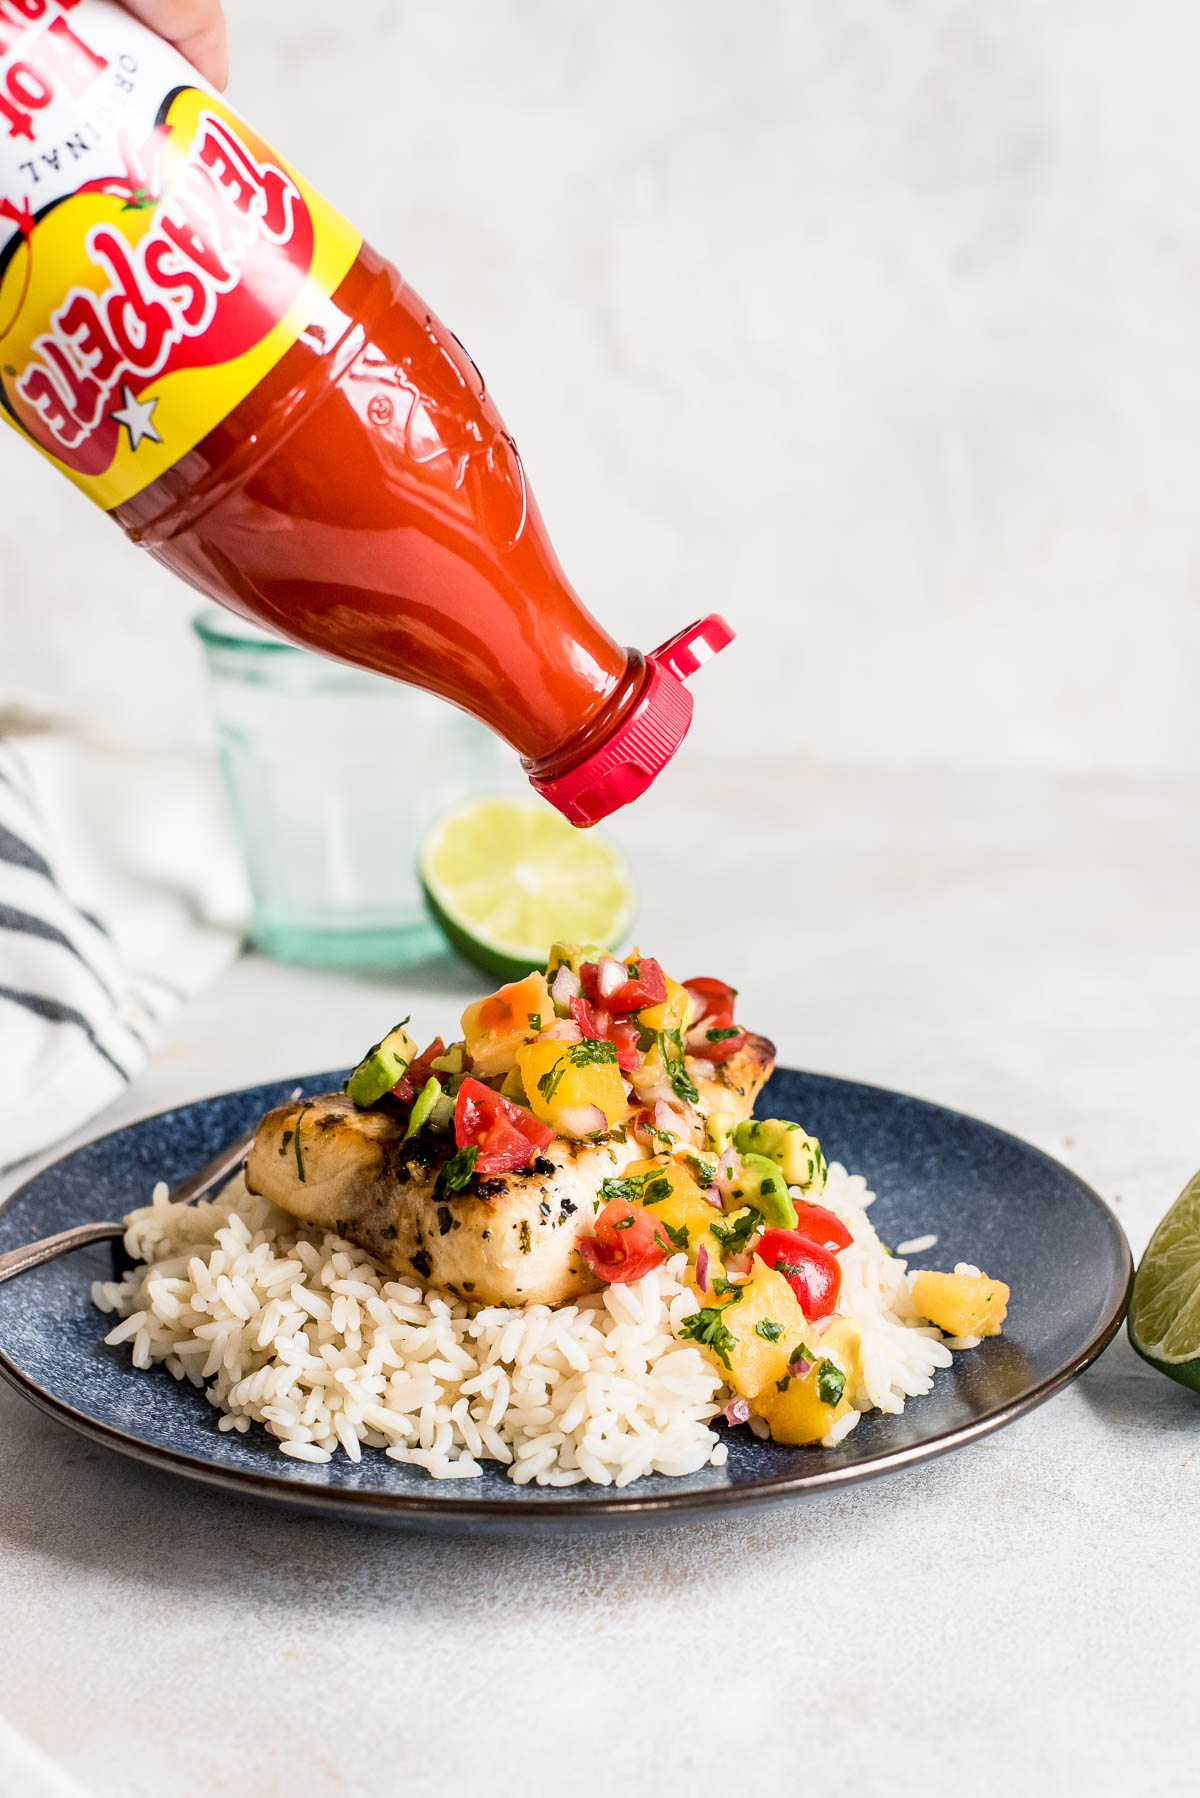 Texas Pete hot sauce being added to swordfish that is topped with salsa and on bed of rice on blue plate